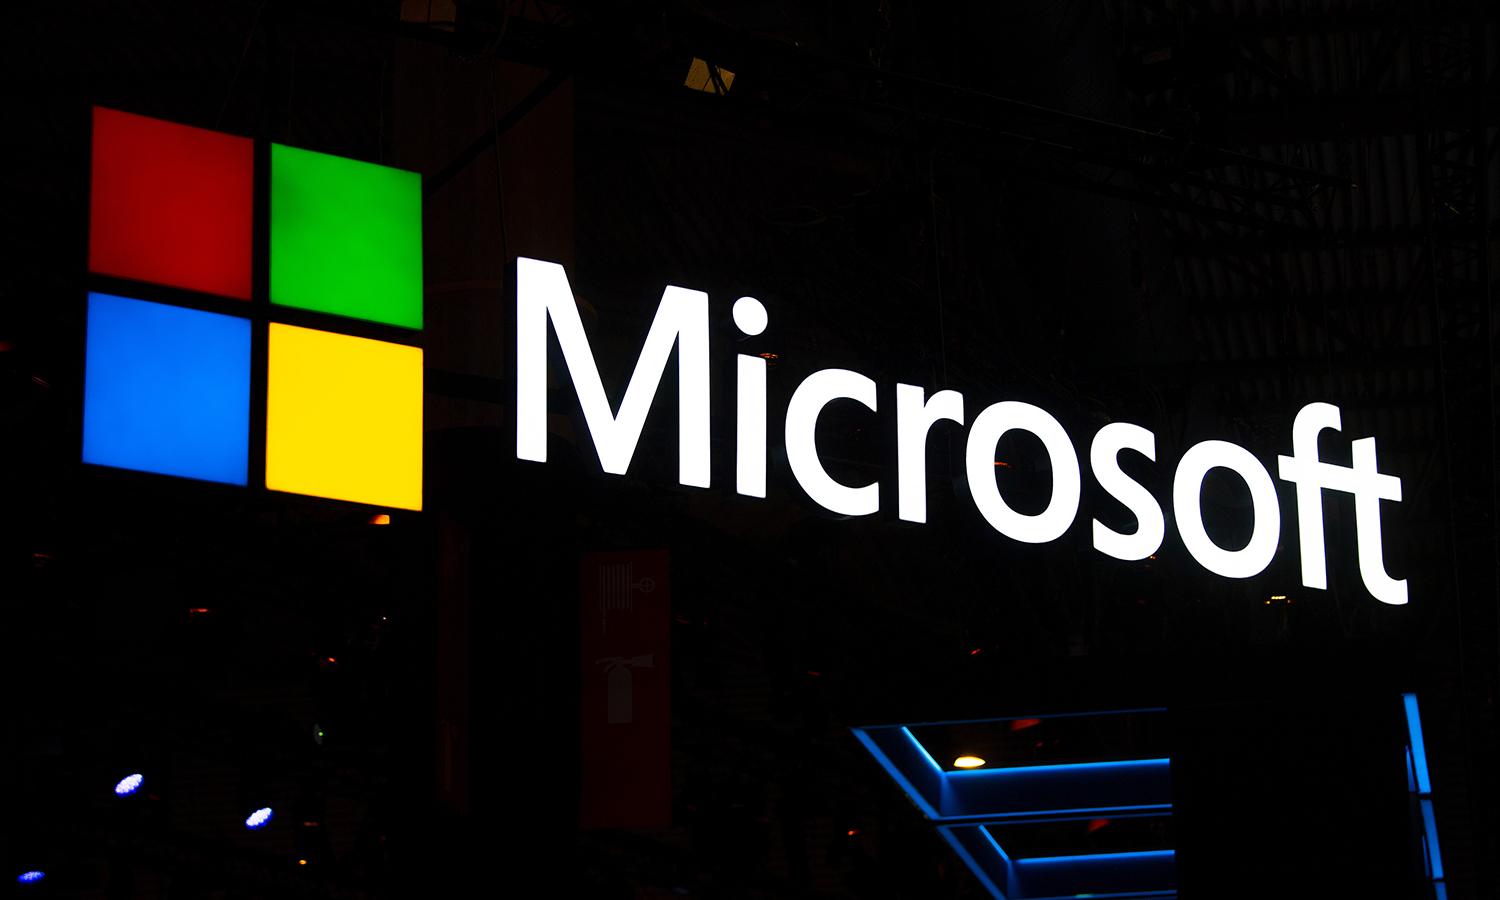 A Microsoft logo is illuminated at the GSMA Mobile World Congress 2019 on Feb. 26, 2019, in Barcelona. (Photo by David Ramos/Getty Images)